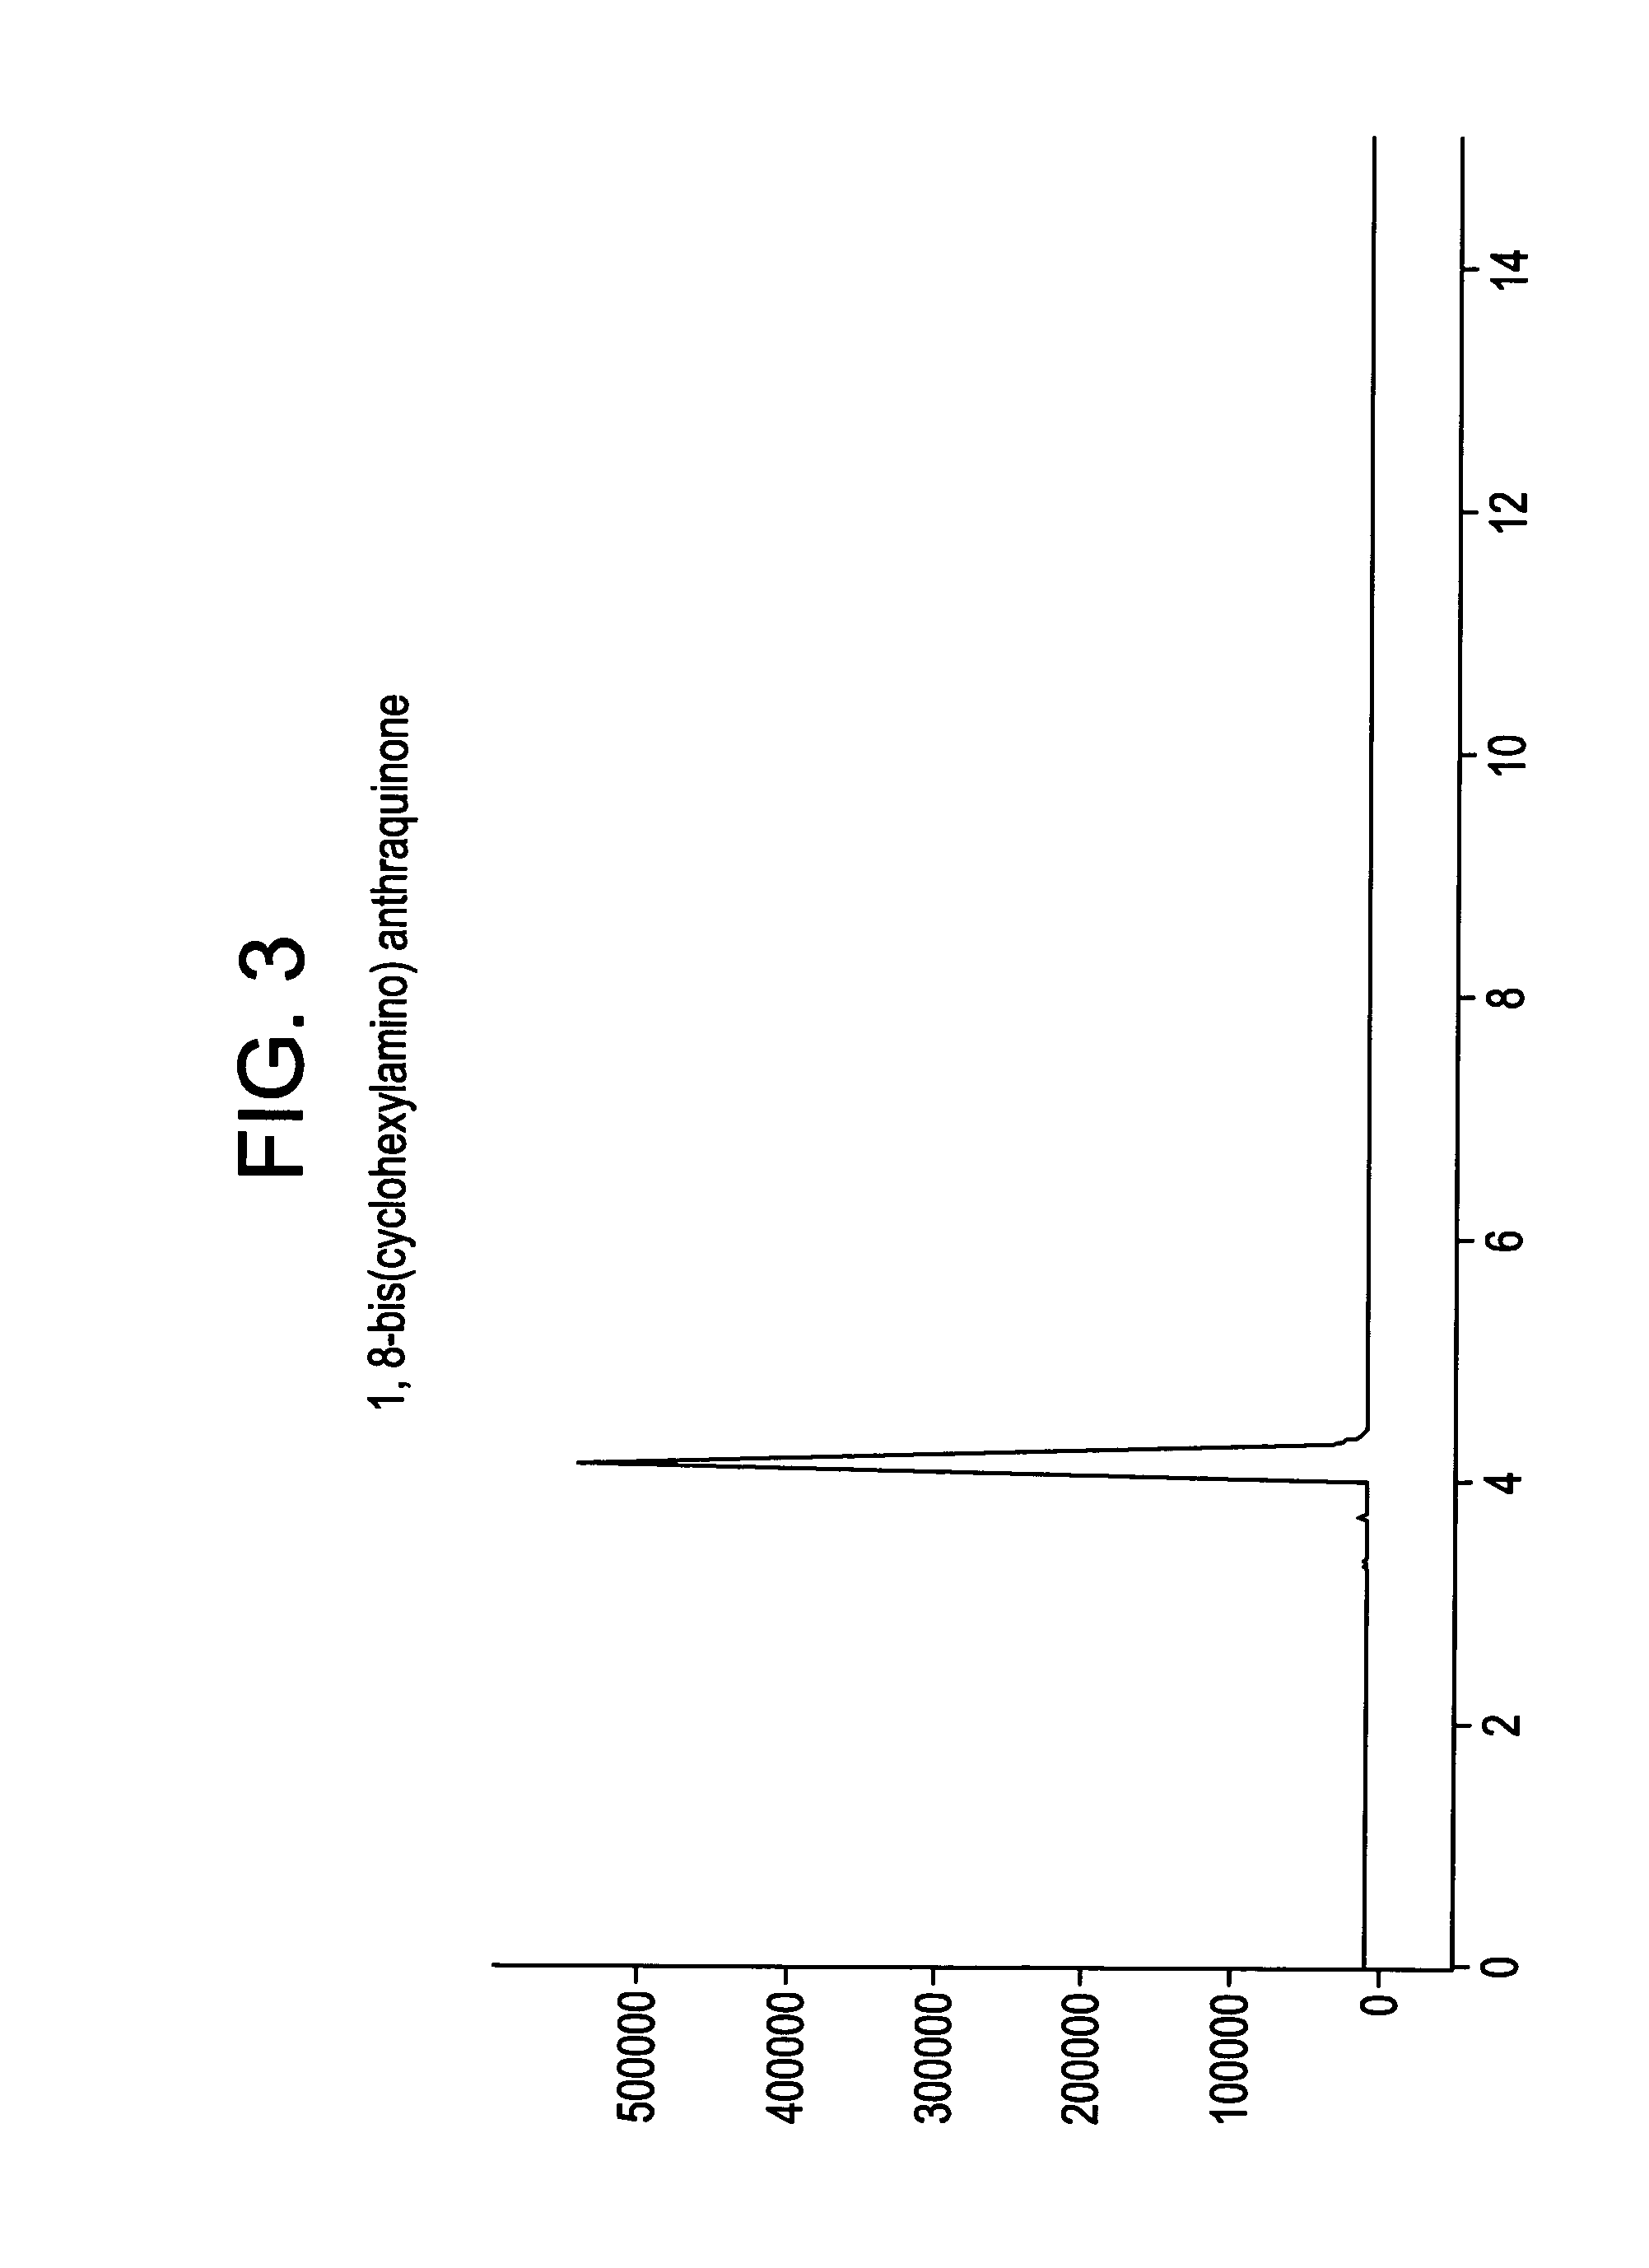 Colored polymeric resin composition, article made therefrom, and method for making the same